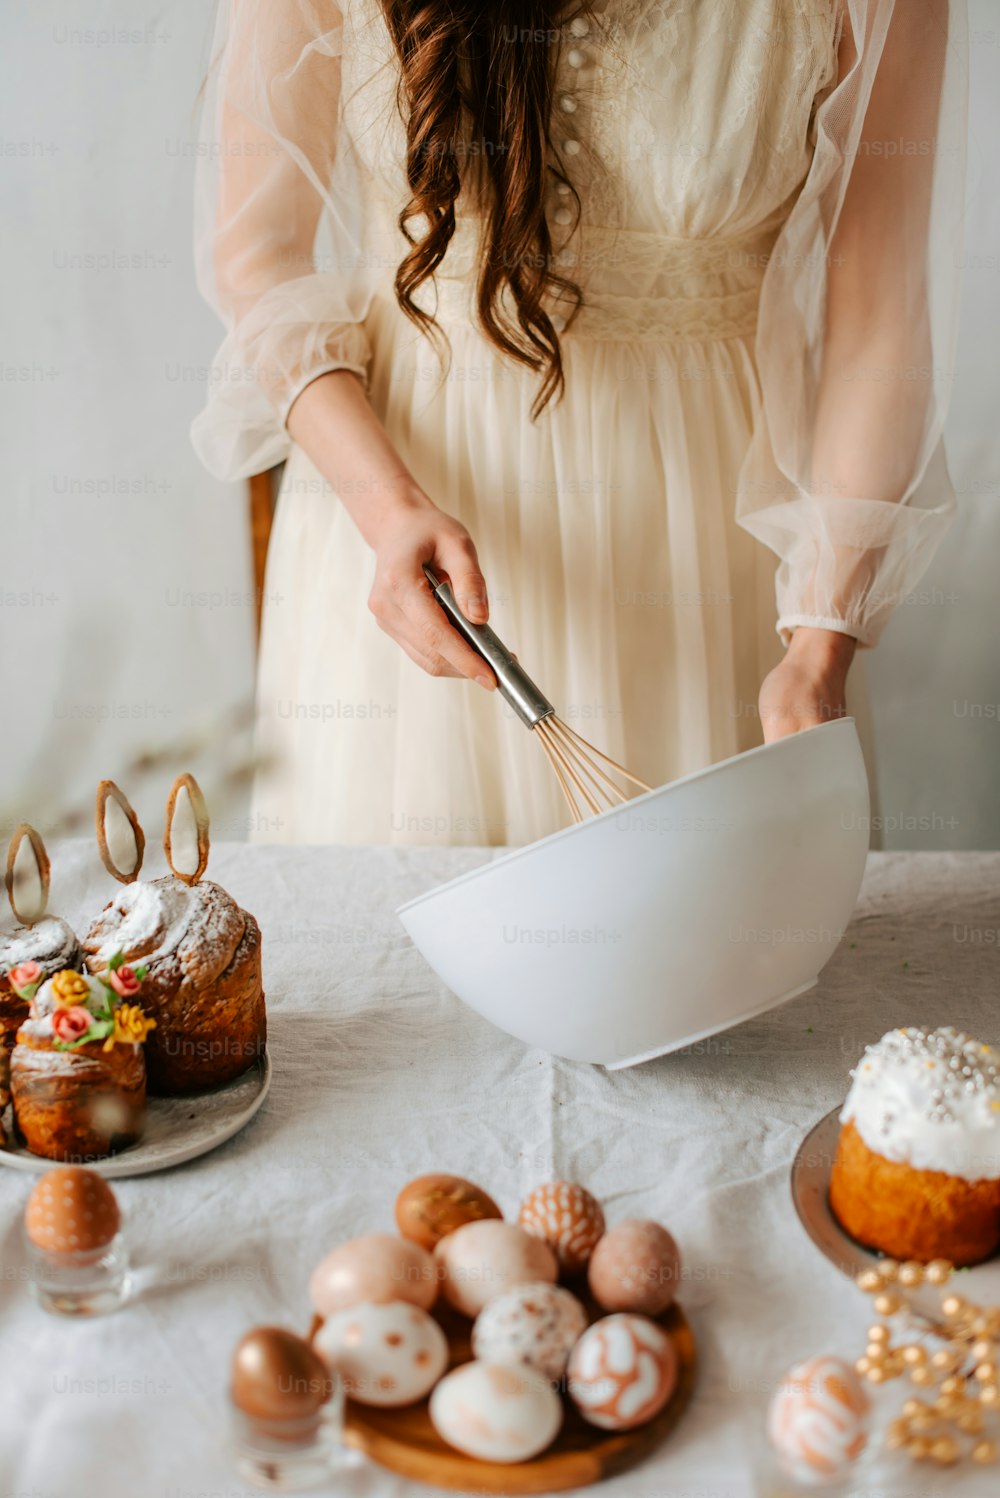 a woman in a white dress mixing a bowl with a whisk